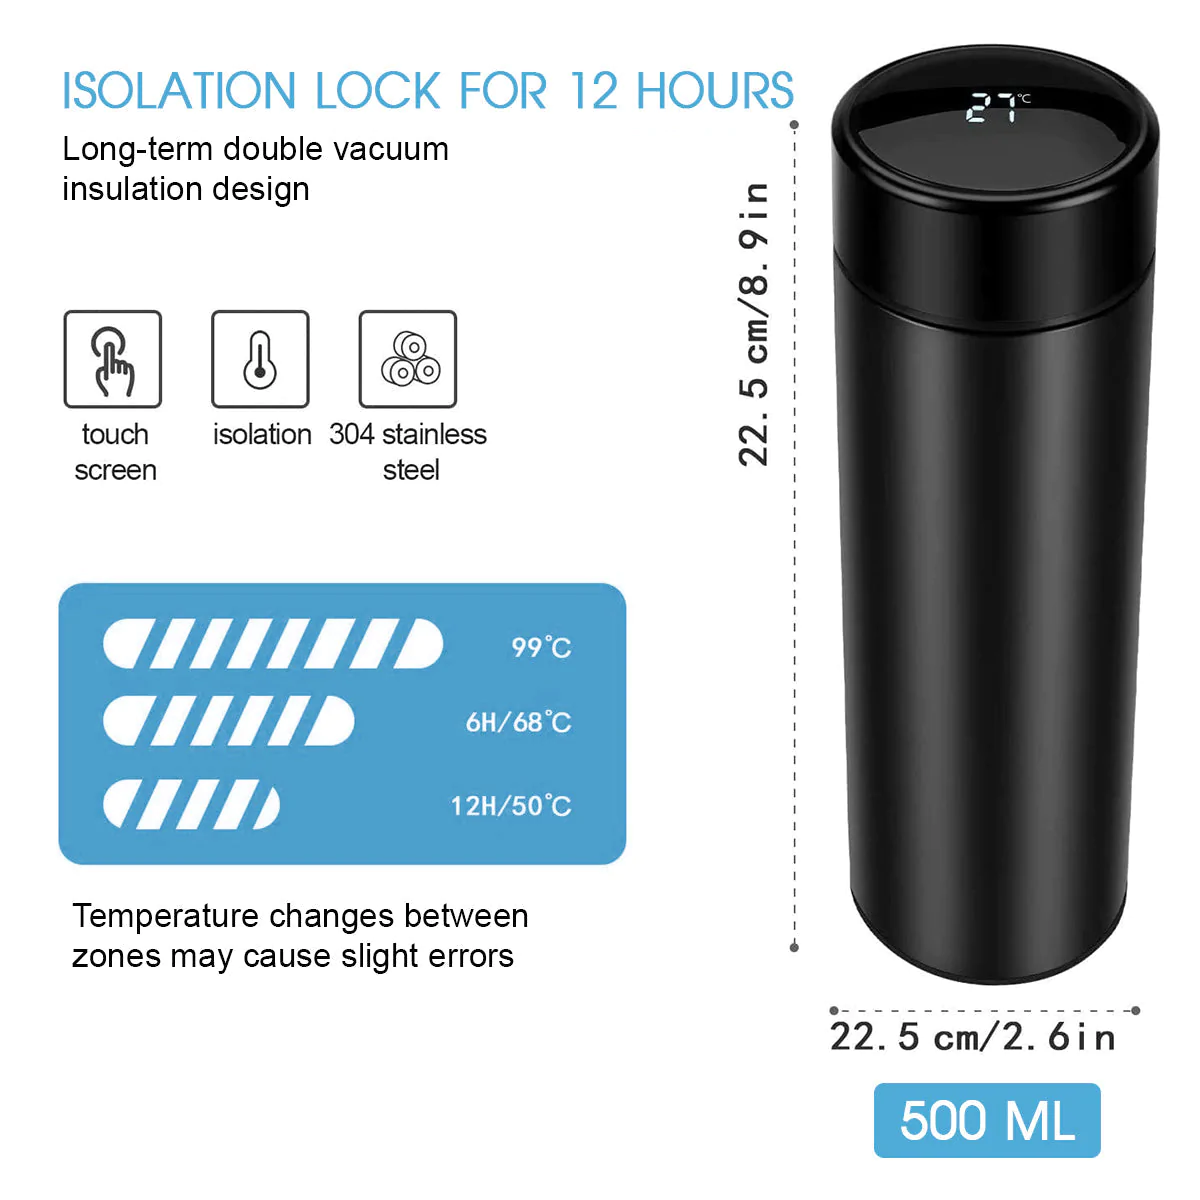 Custom Text and Logo 17oz Insulated Water Bottle with LED Temperature Display, Compatible with Daewoo, Coffee Tea Infuser Bottle Double Wall Vacuum Insulated Water Bottle for Hot or Cold Drink - Delicate Leather